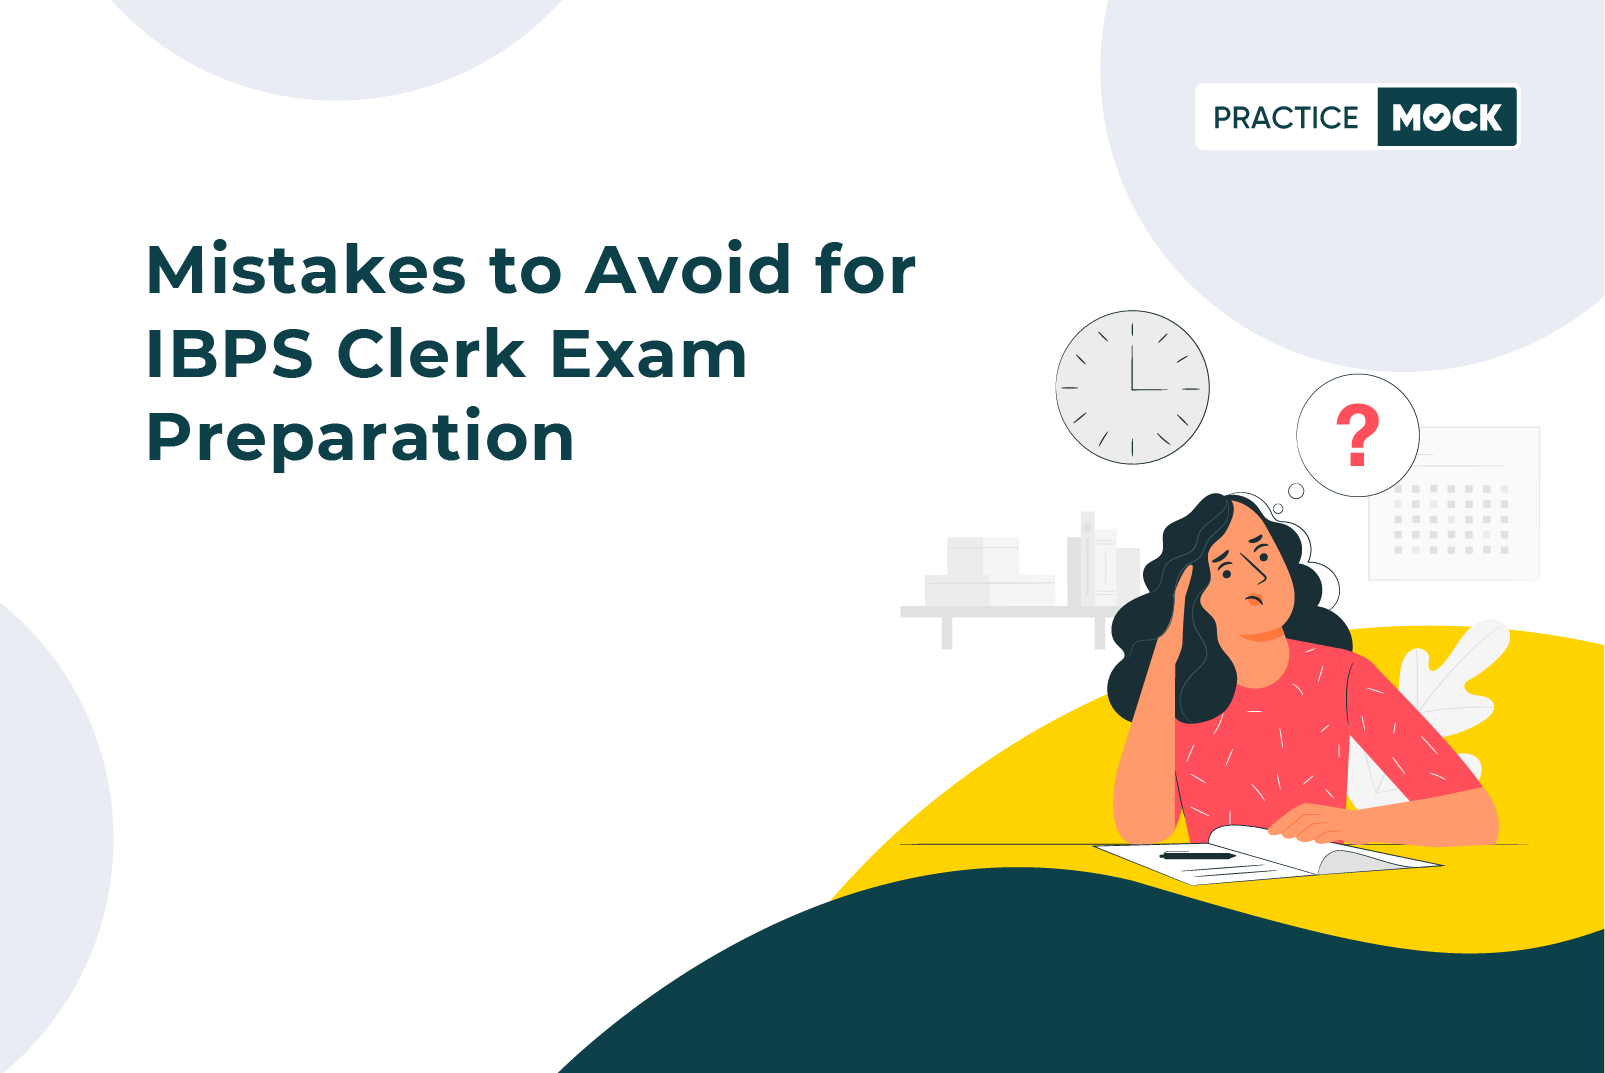 Mistakes to Avoid for IBPS Clerk Exam Preparation